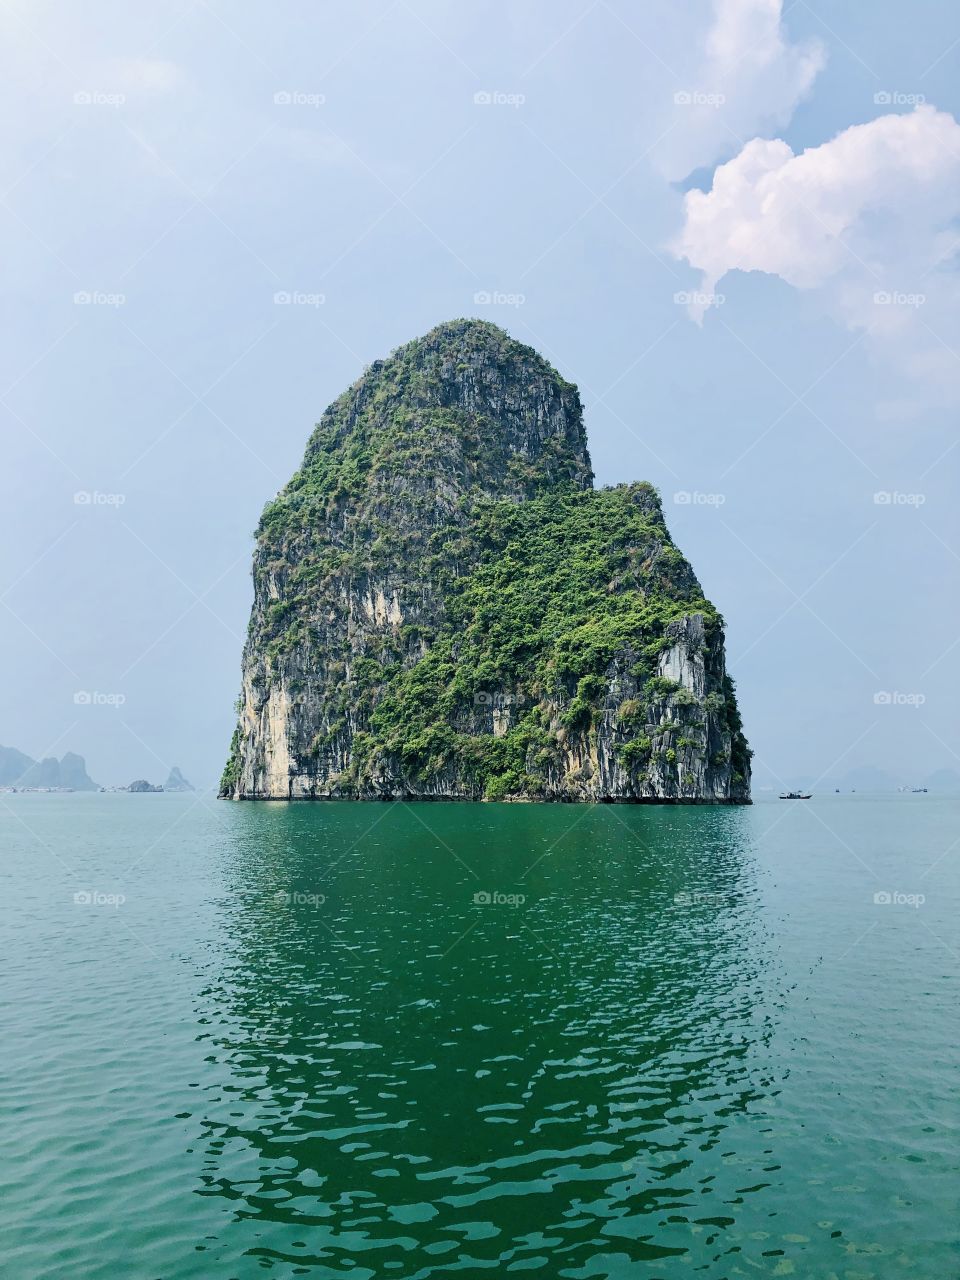 An island jutting out of the ocean in Halong Bay.